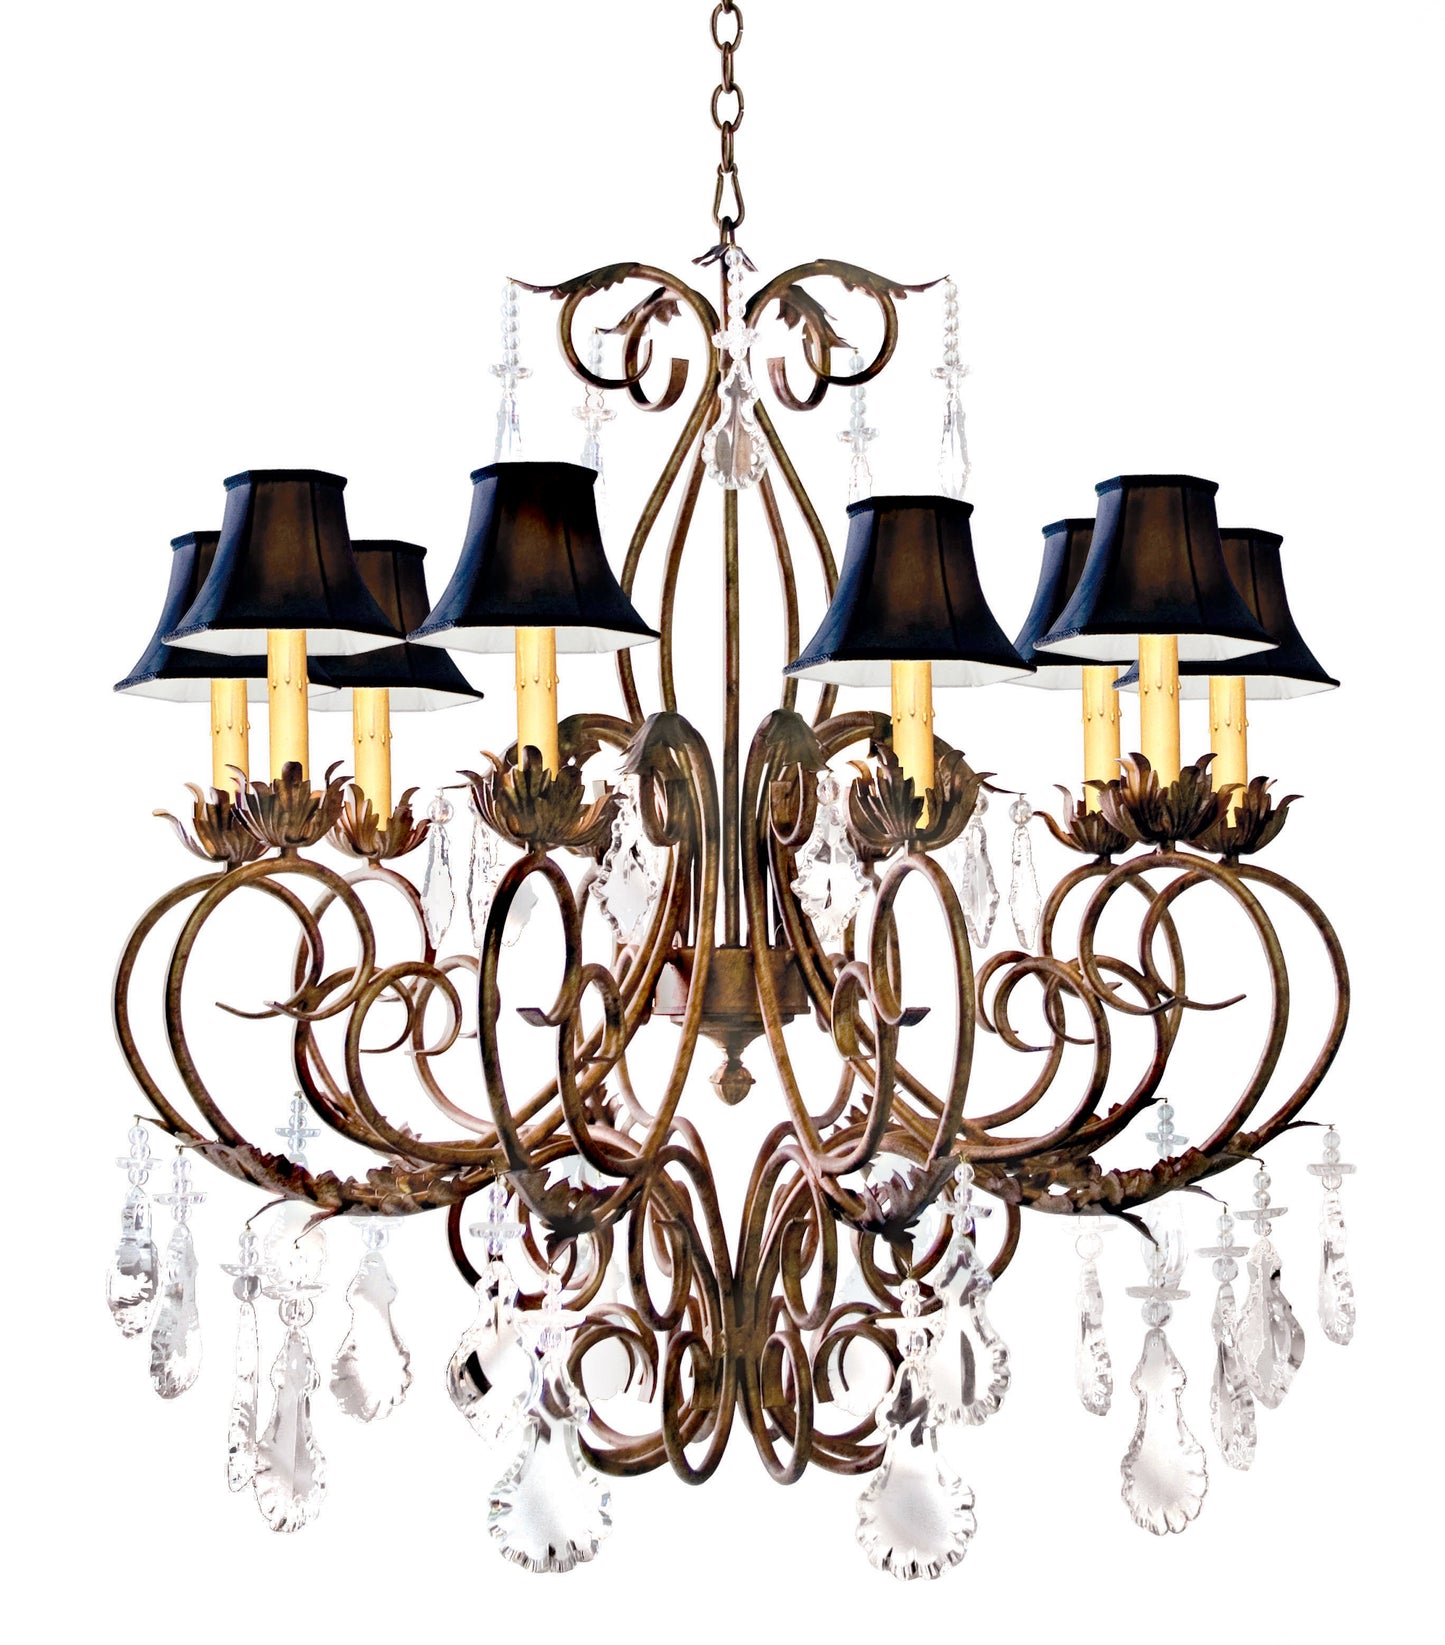 42" Felicia 10-Light Chandelier by 2nd Ave Lighting